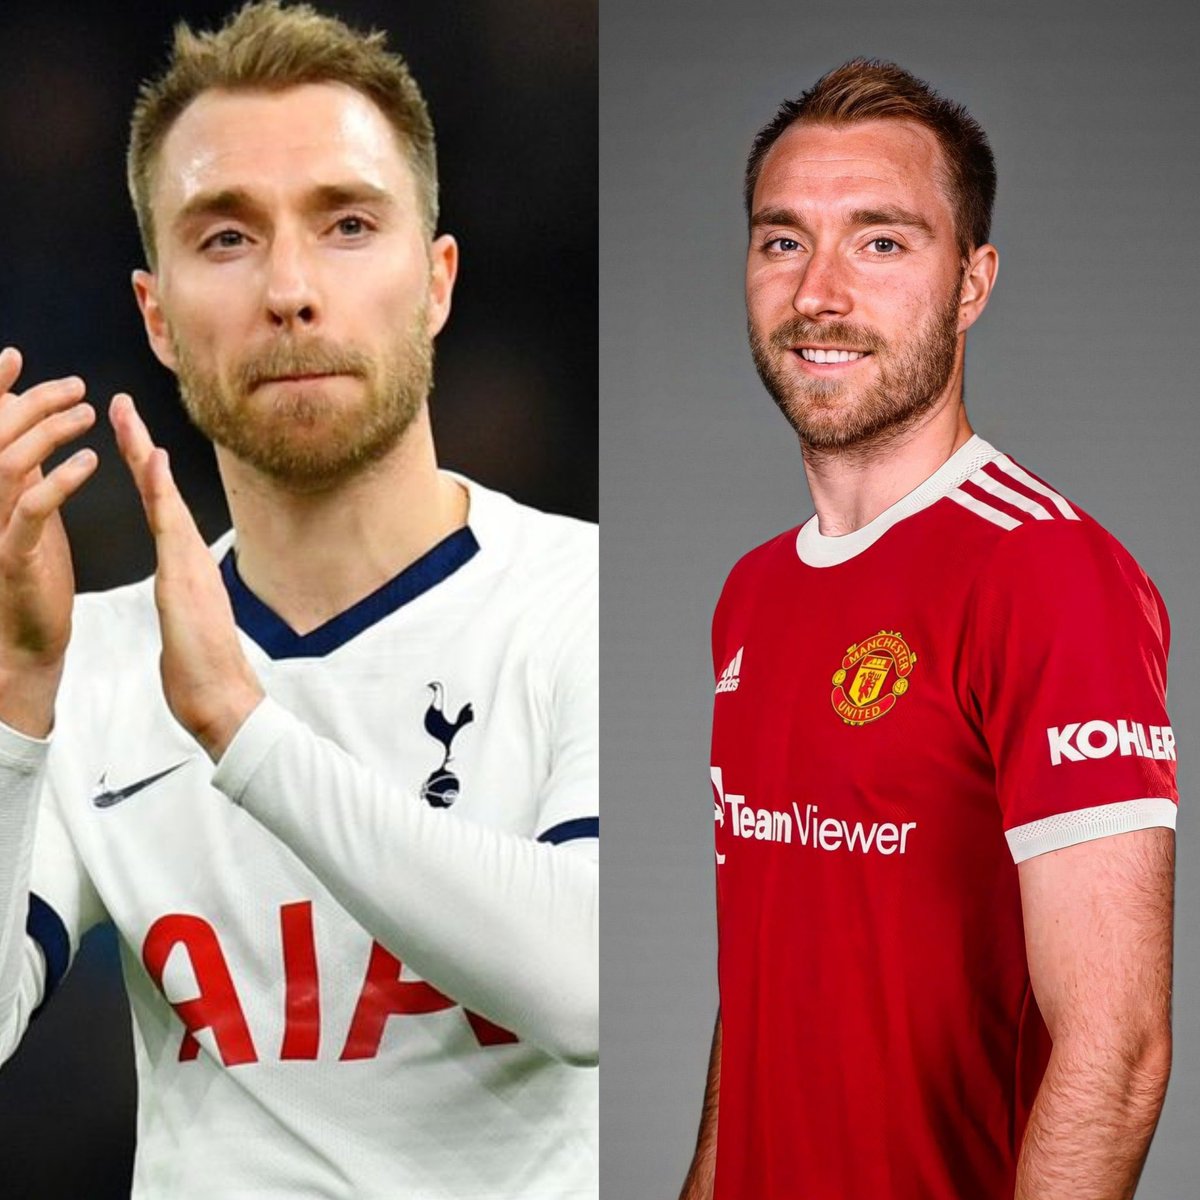 Christian Eriksen: 7 years at Spurs- 0 trophies. 2 years at Man United- 2 trophies. What a turnaround👏